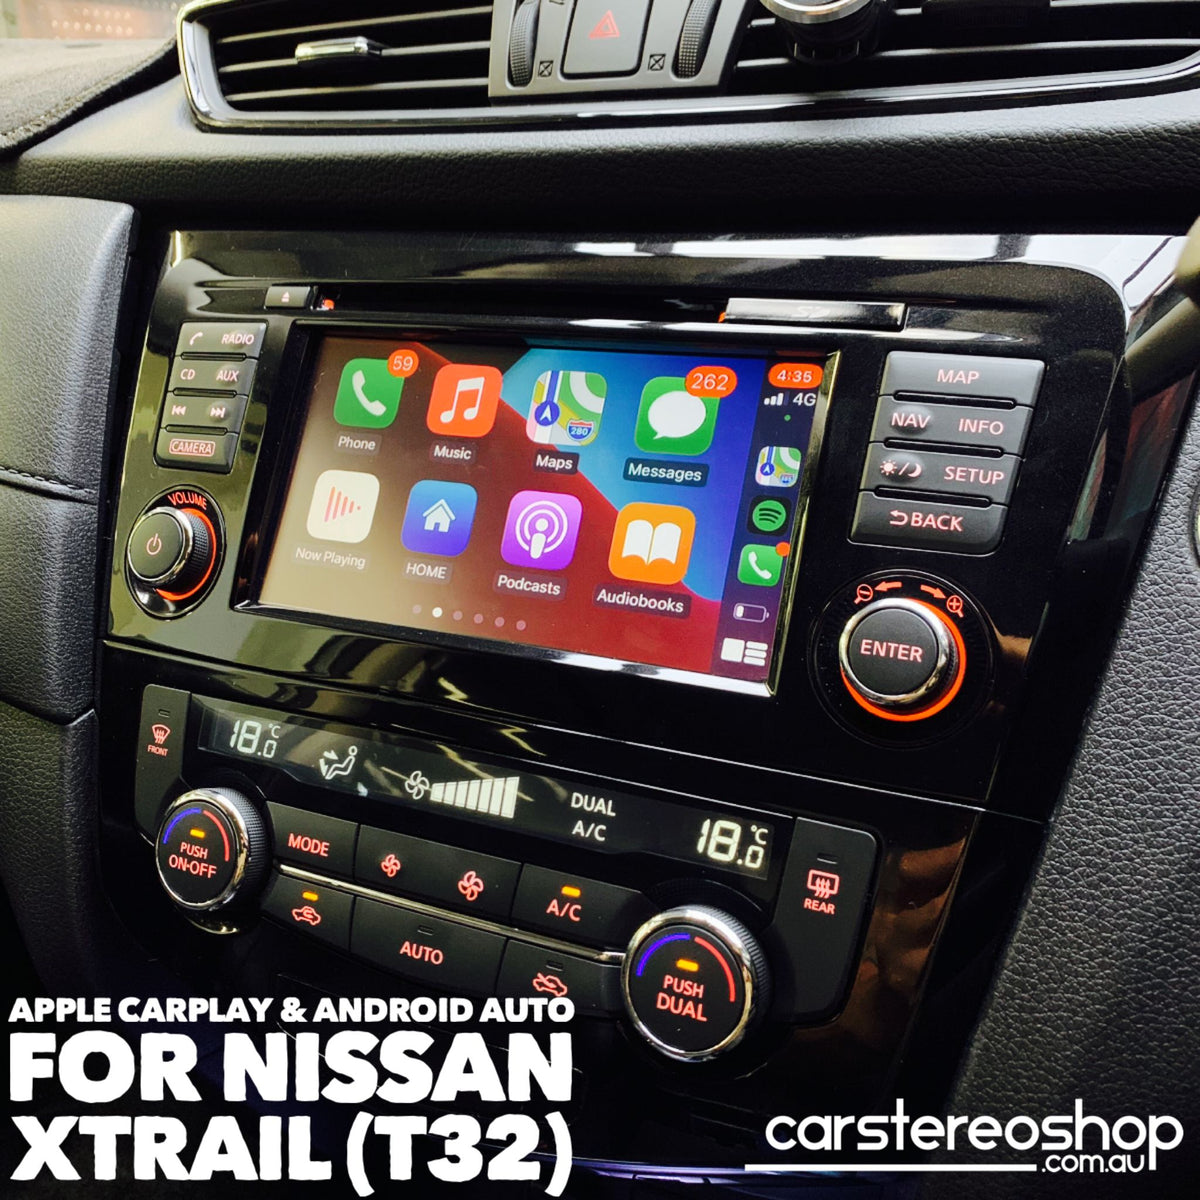 Apple CarPlay & Android Auto Add-On for Nissan XTrail (T32) –